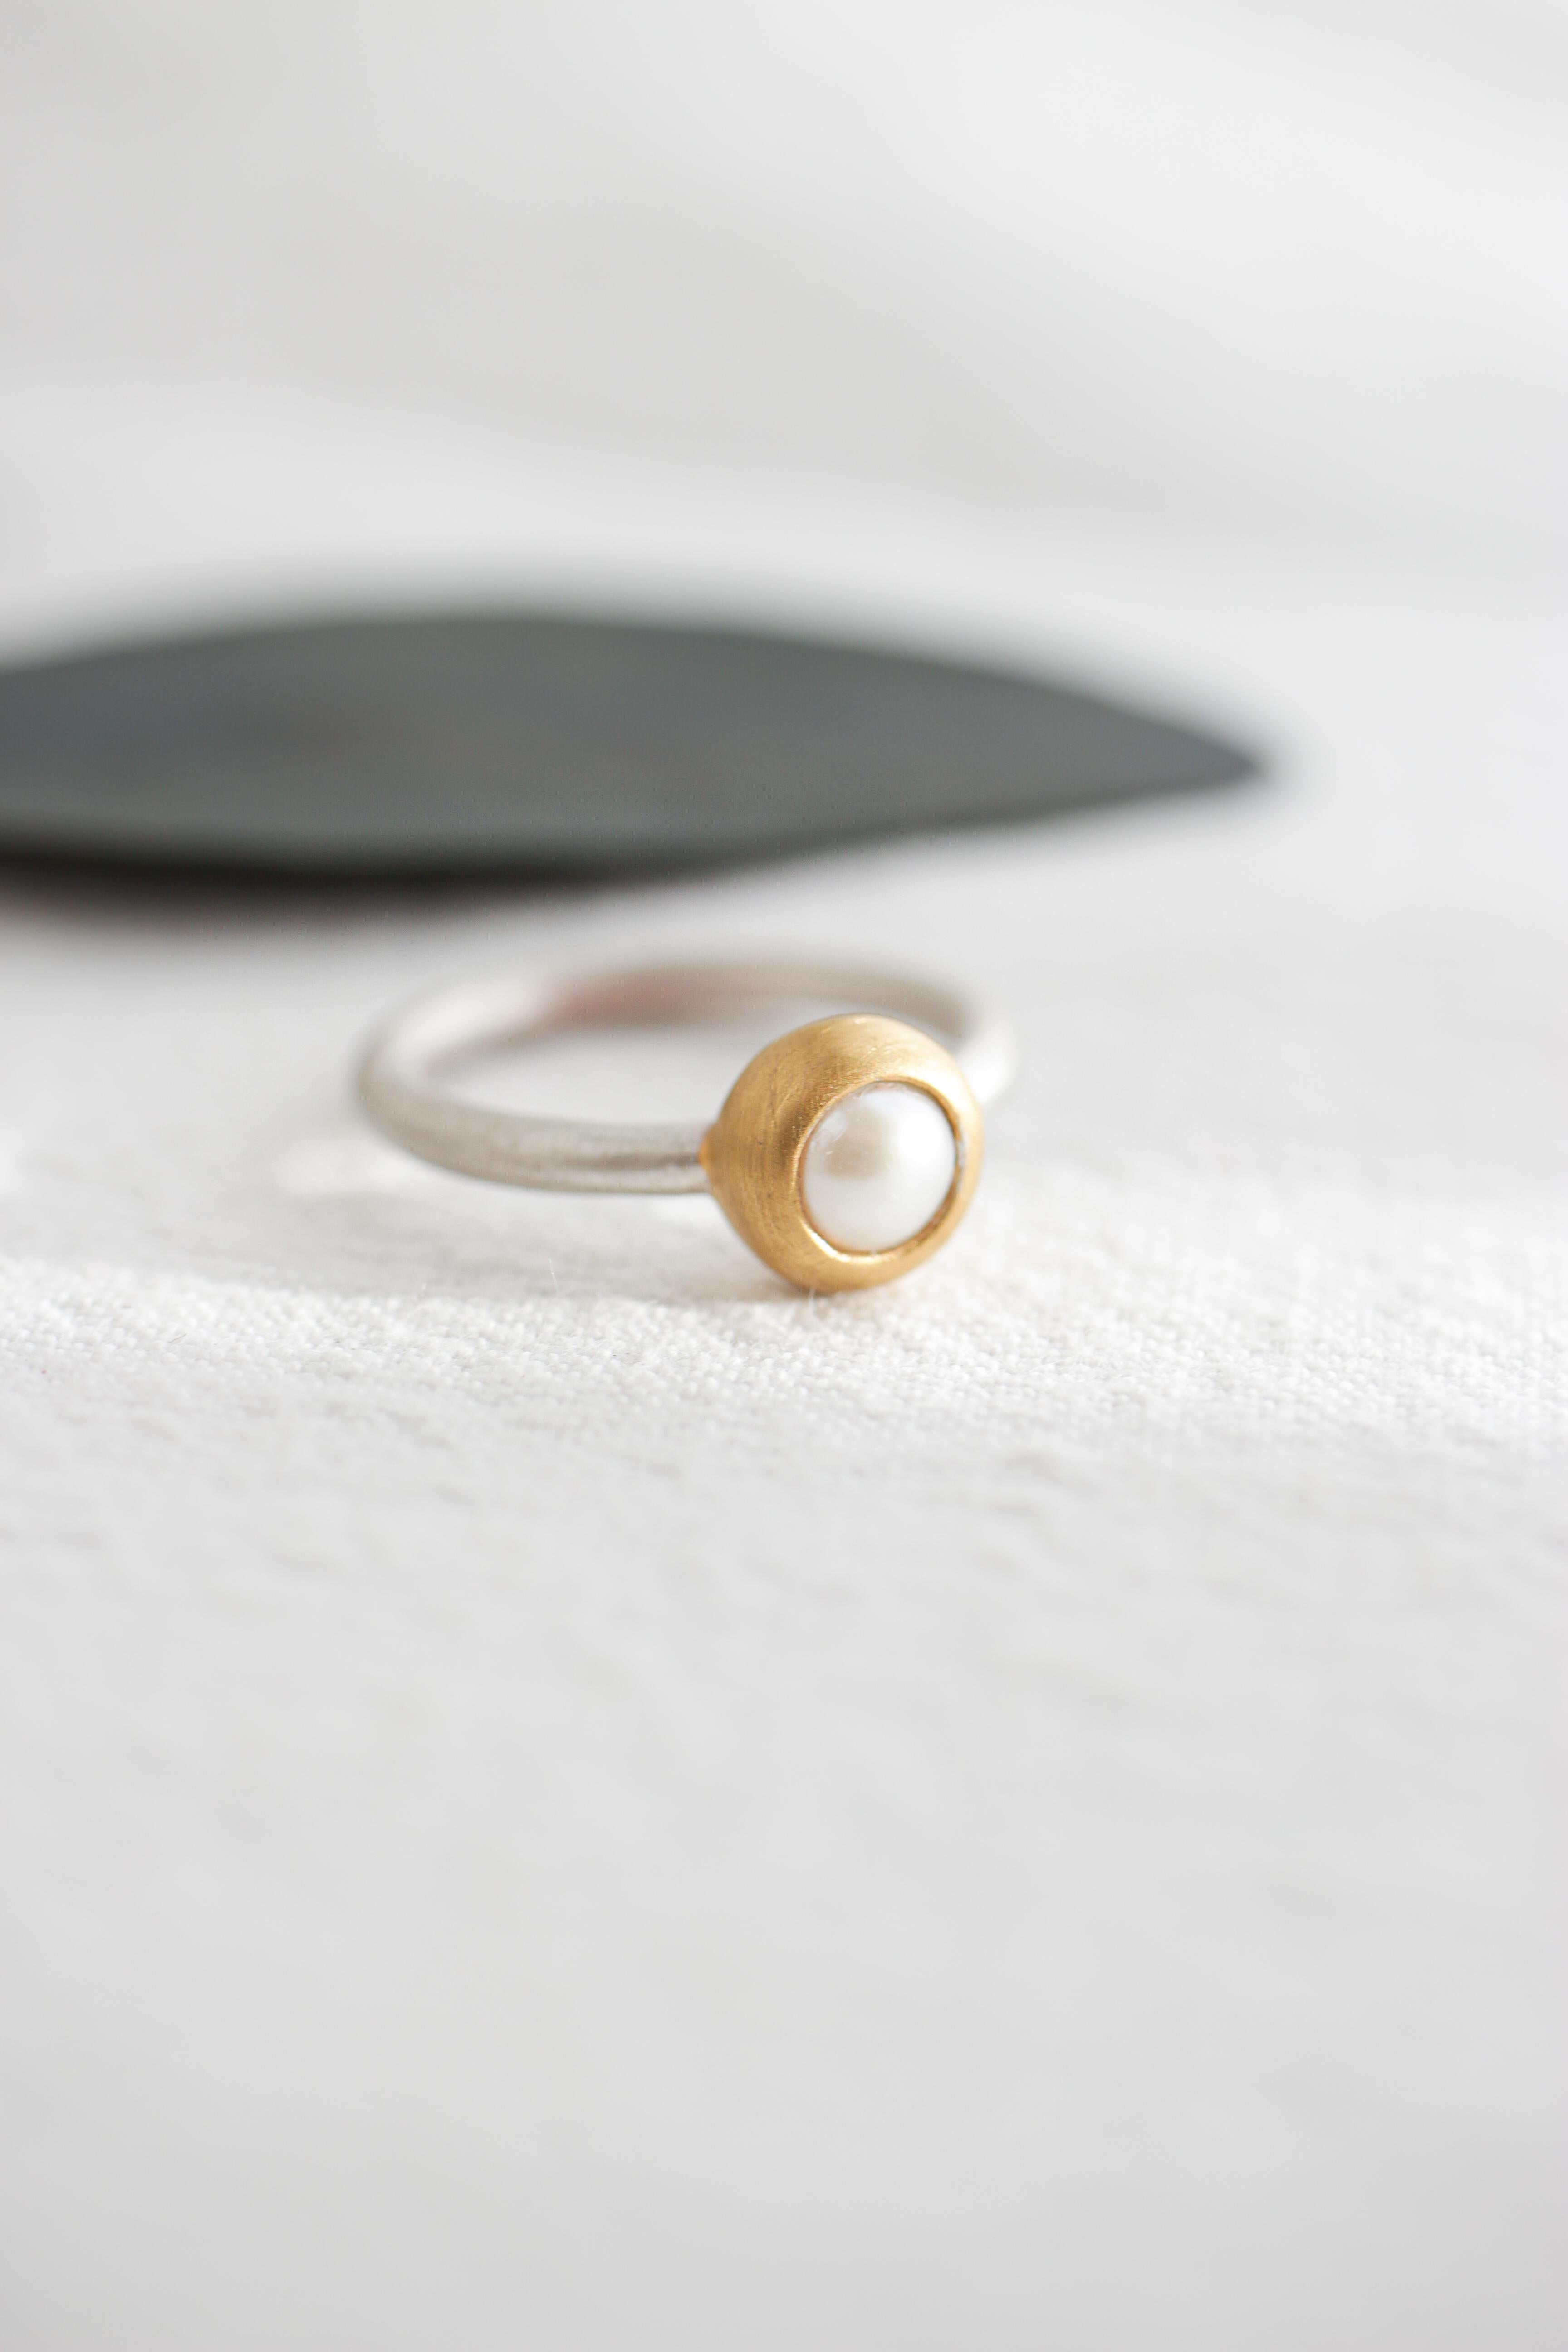 For Sale:  Monika Herré Classic Pearl Ring Sterling Silver Galvanic Gold Plating  2